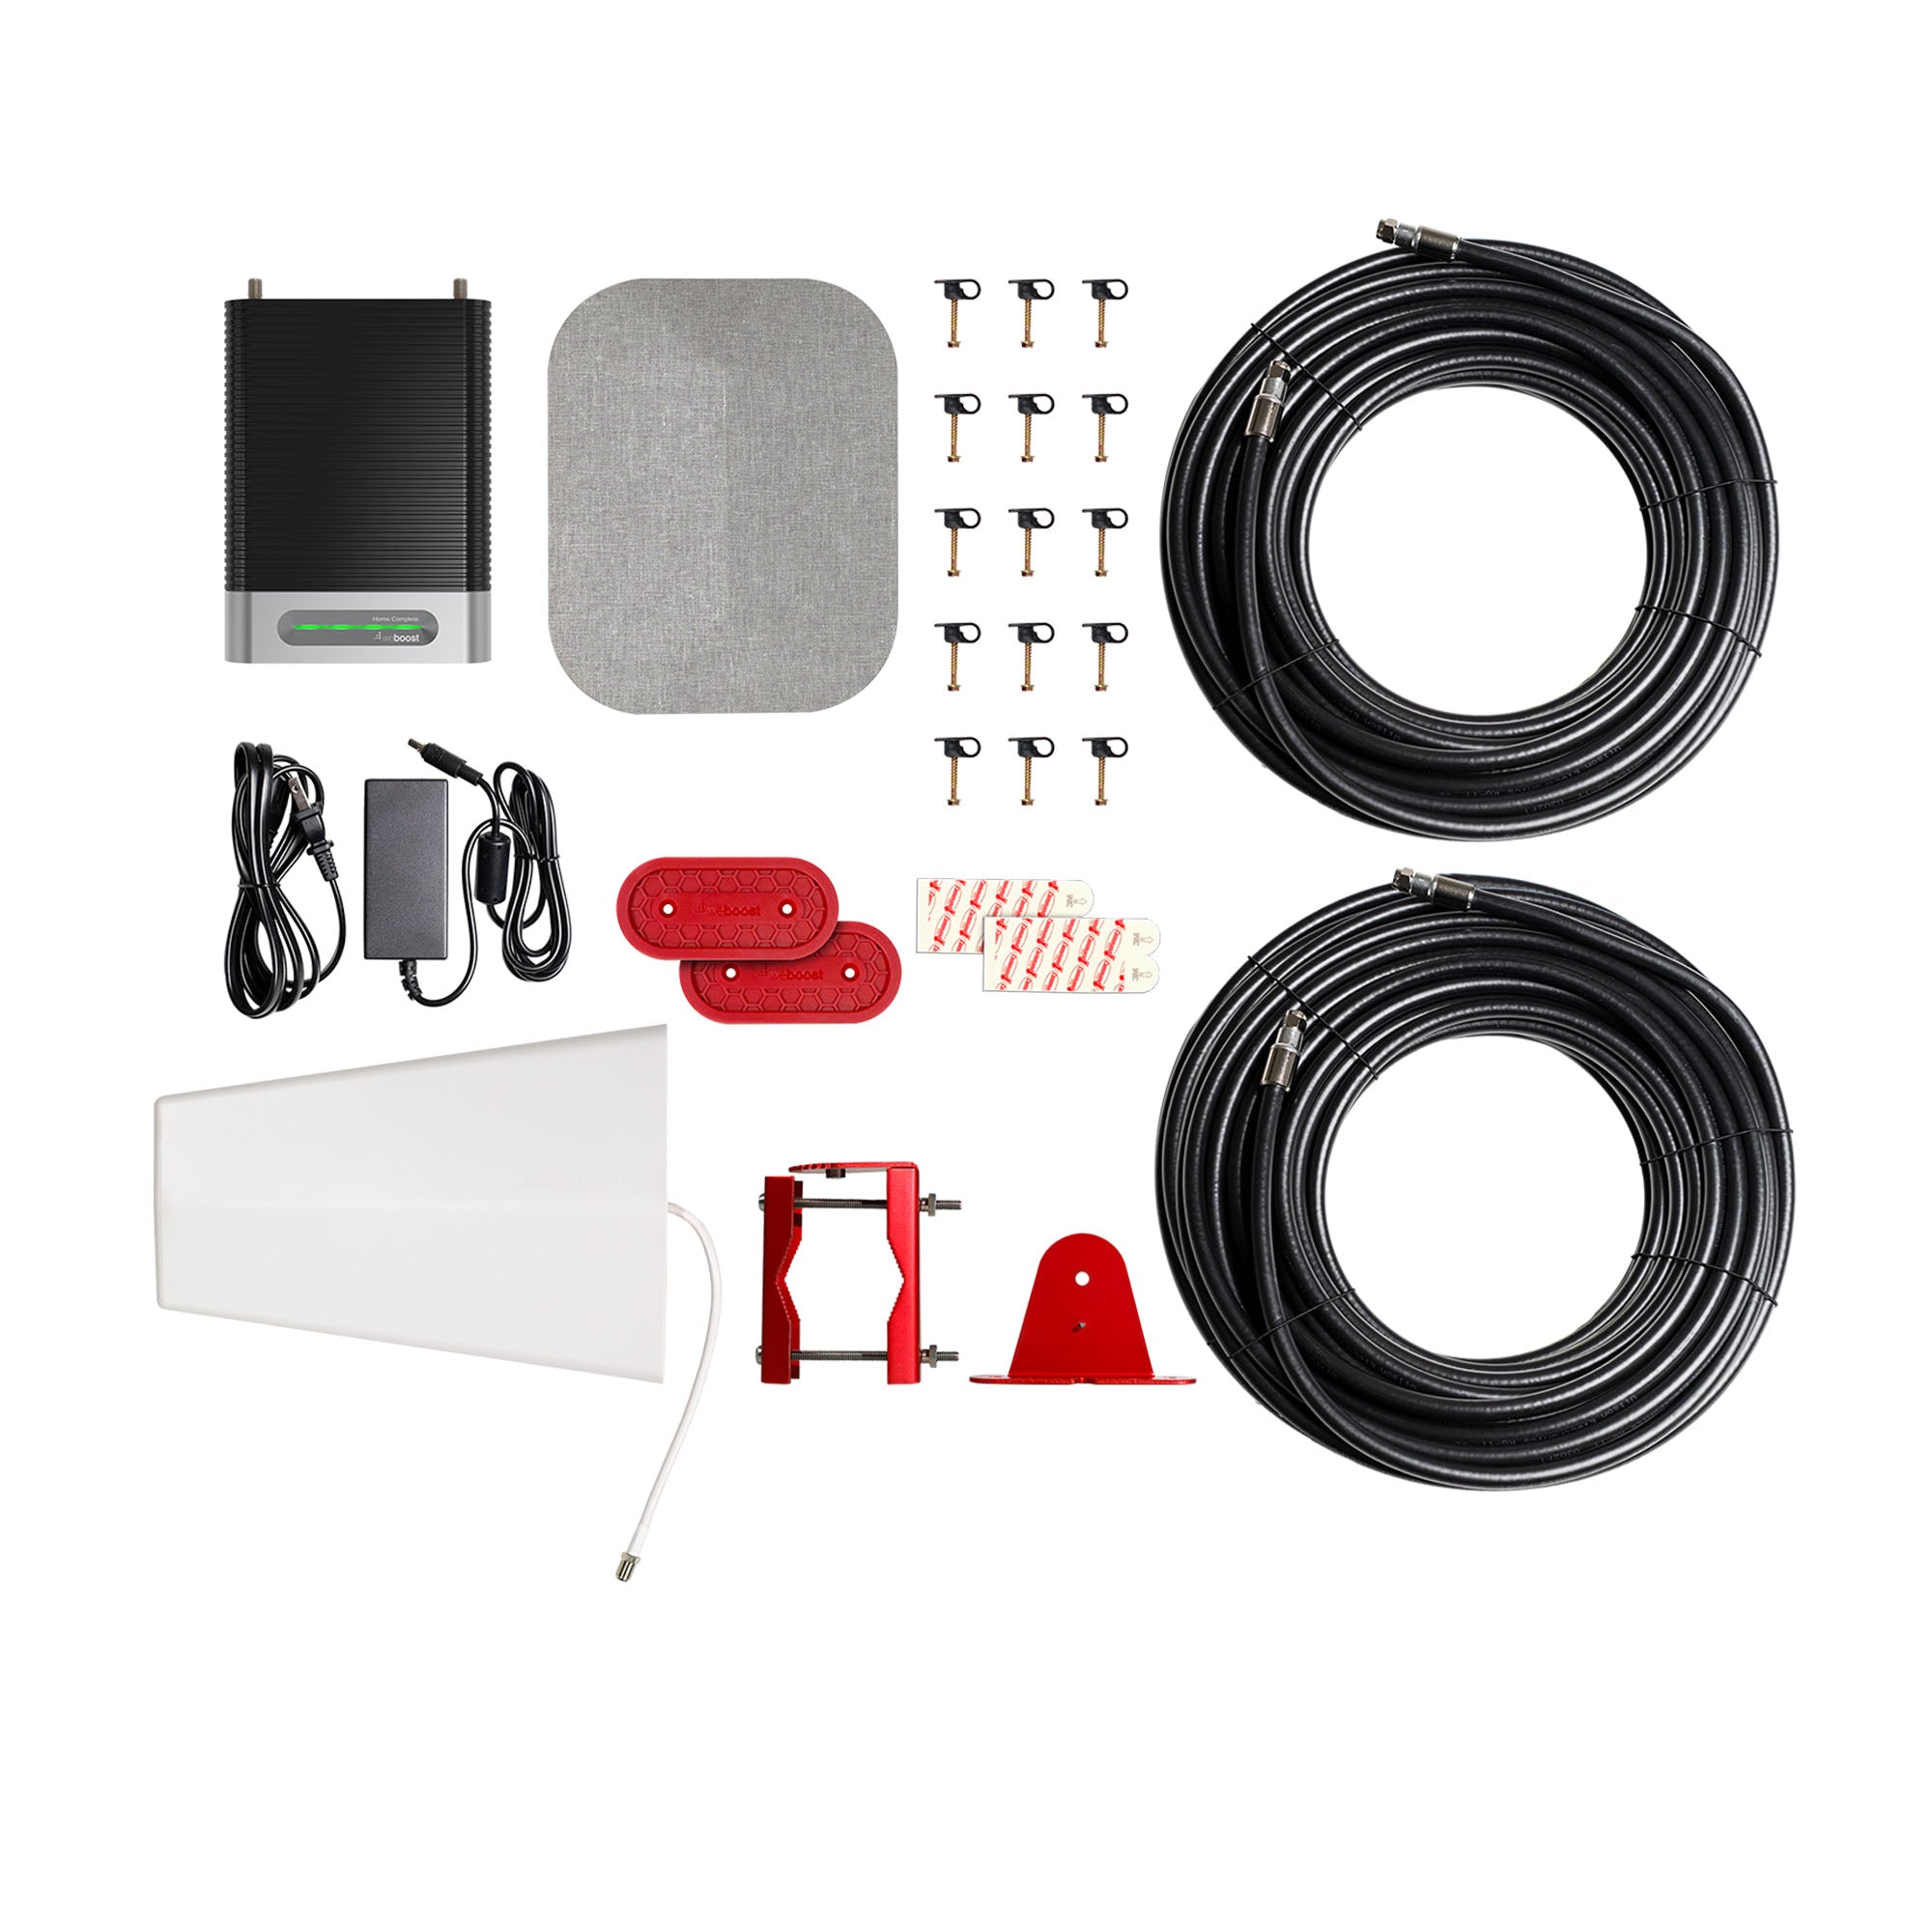 WeBoost Home Complete In-Building Signal Booster Kit